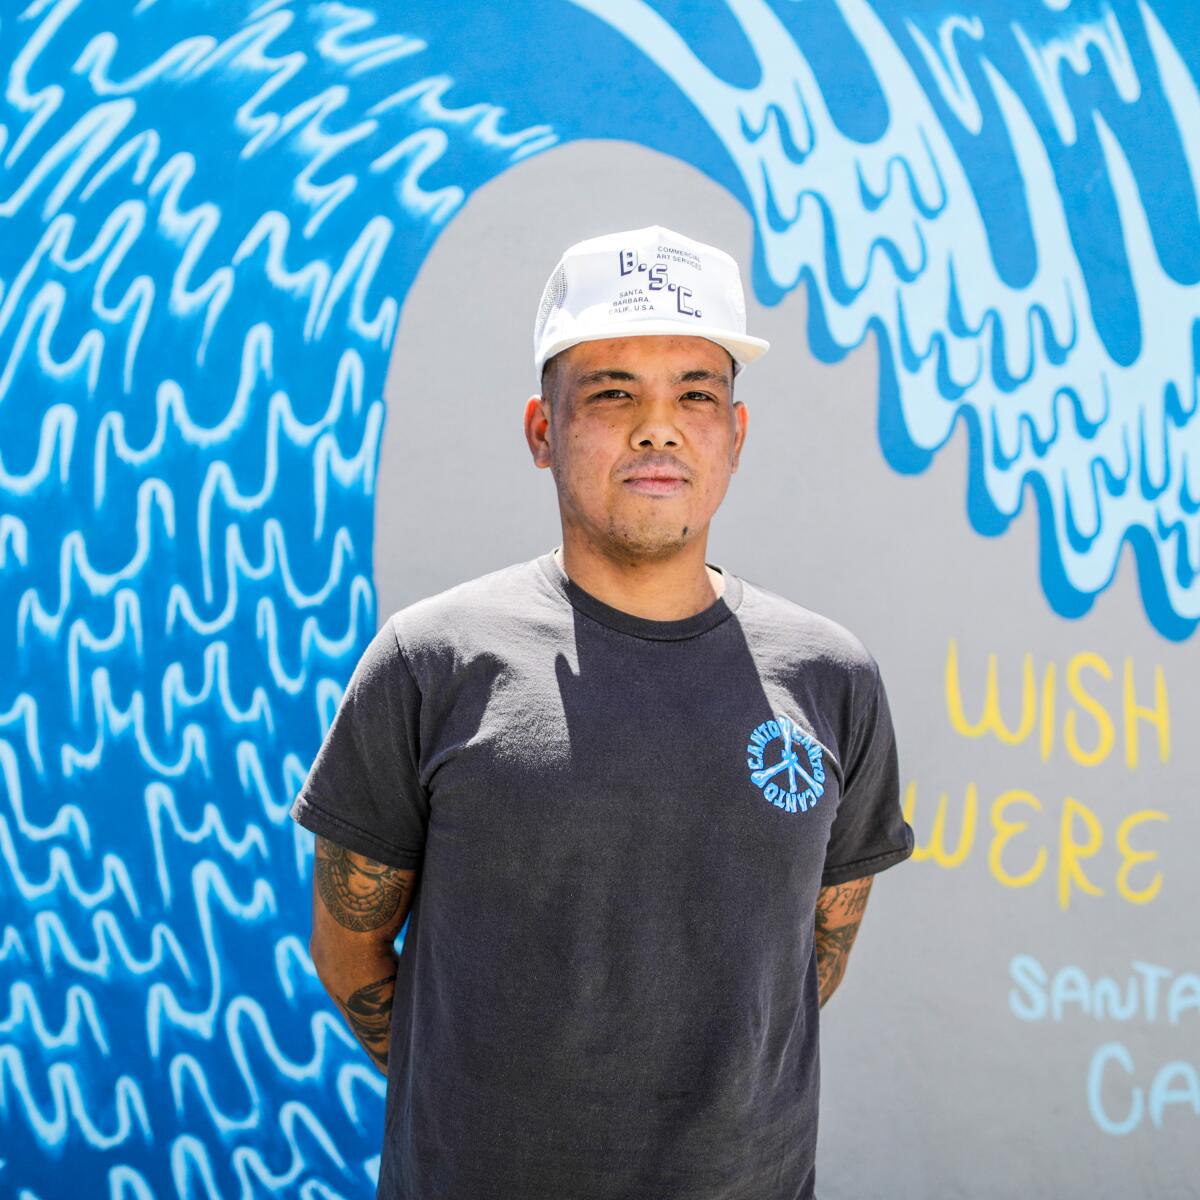 Man standing in front of a mural showing a wave